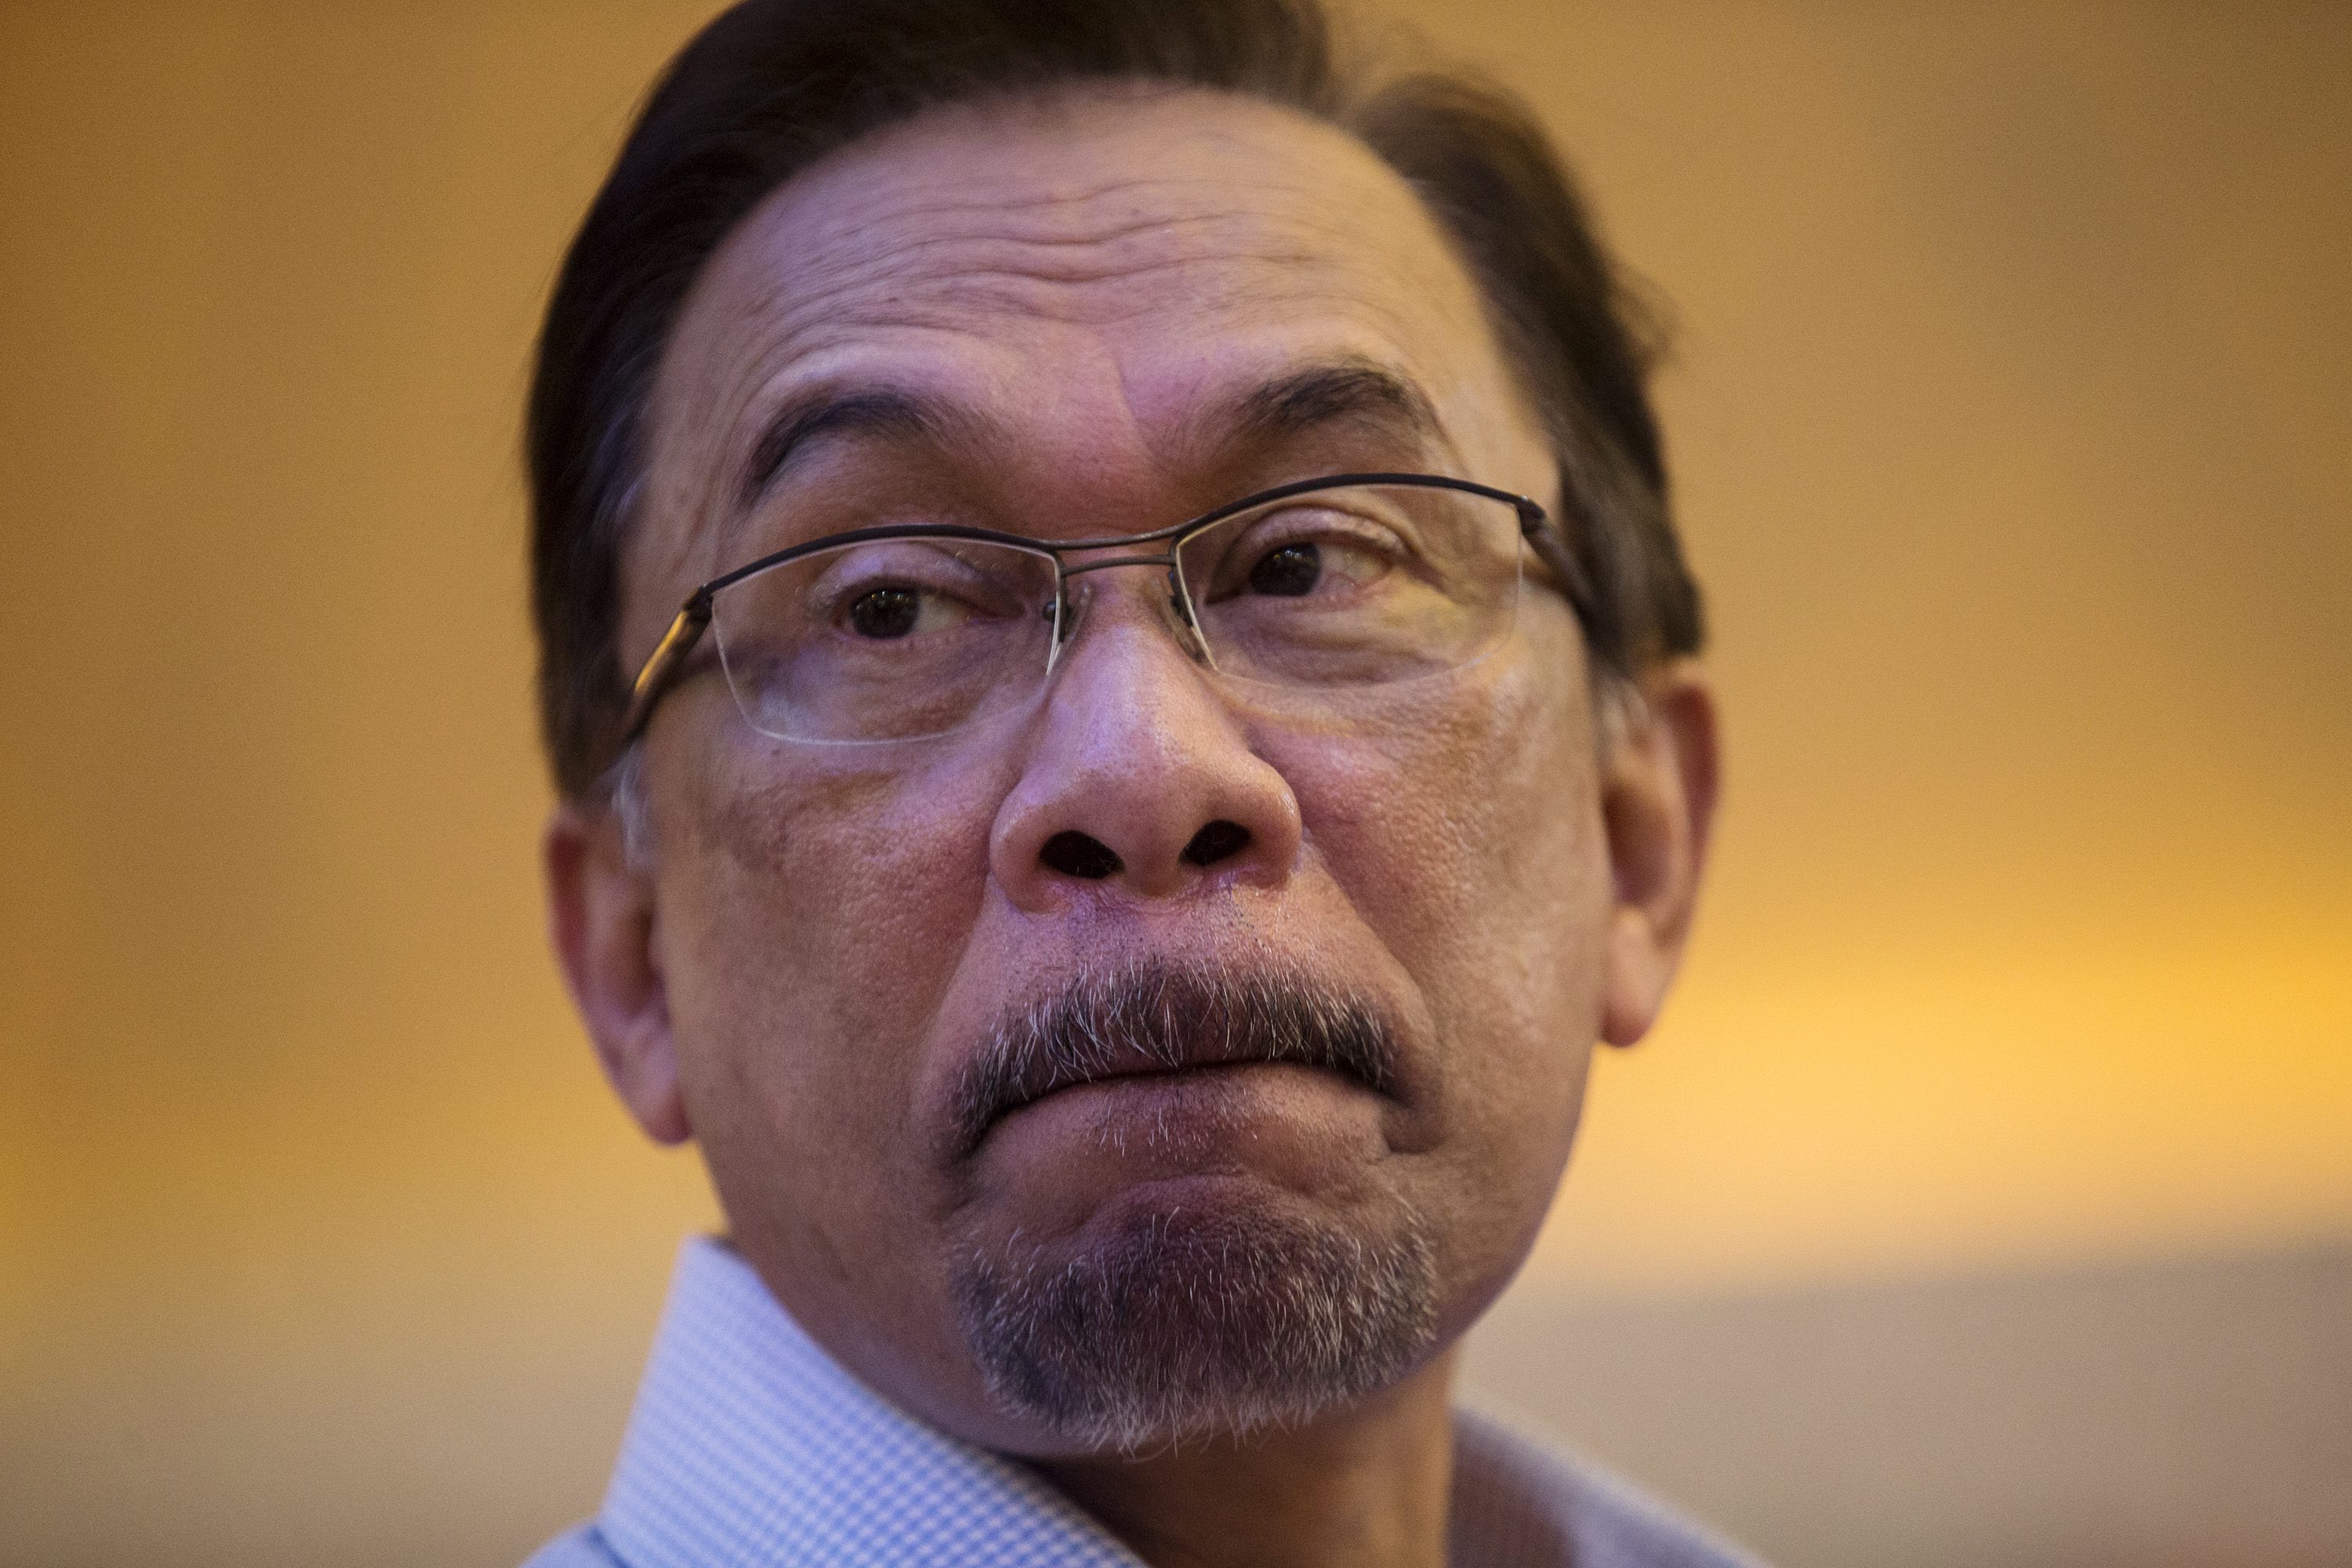 The verdict has brought Anwar's career to an ignominious end. Photo: EPA